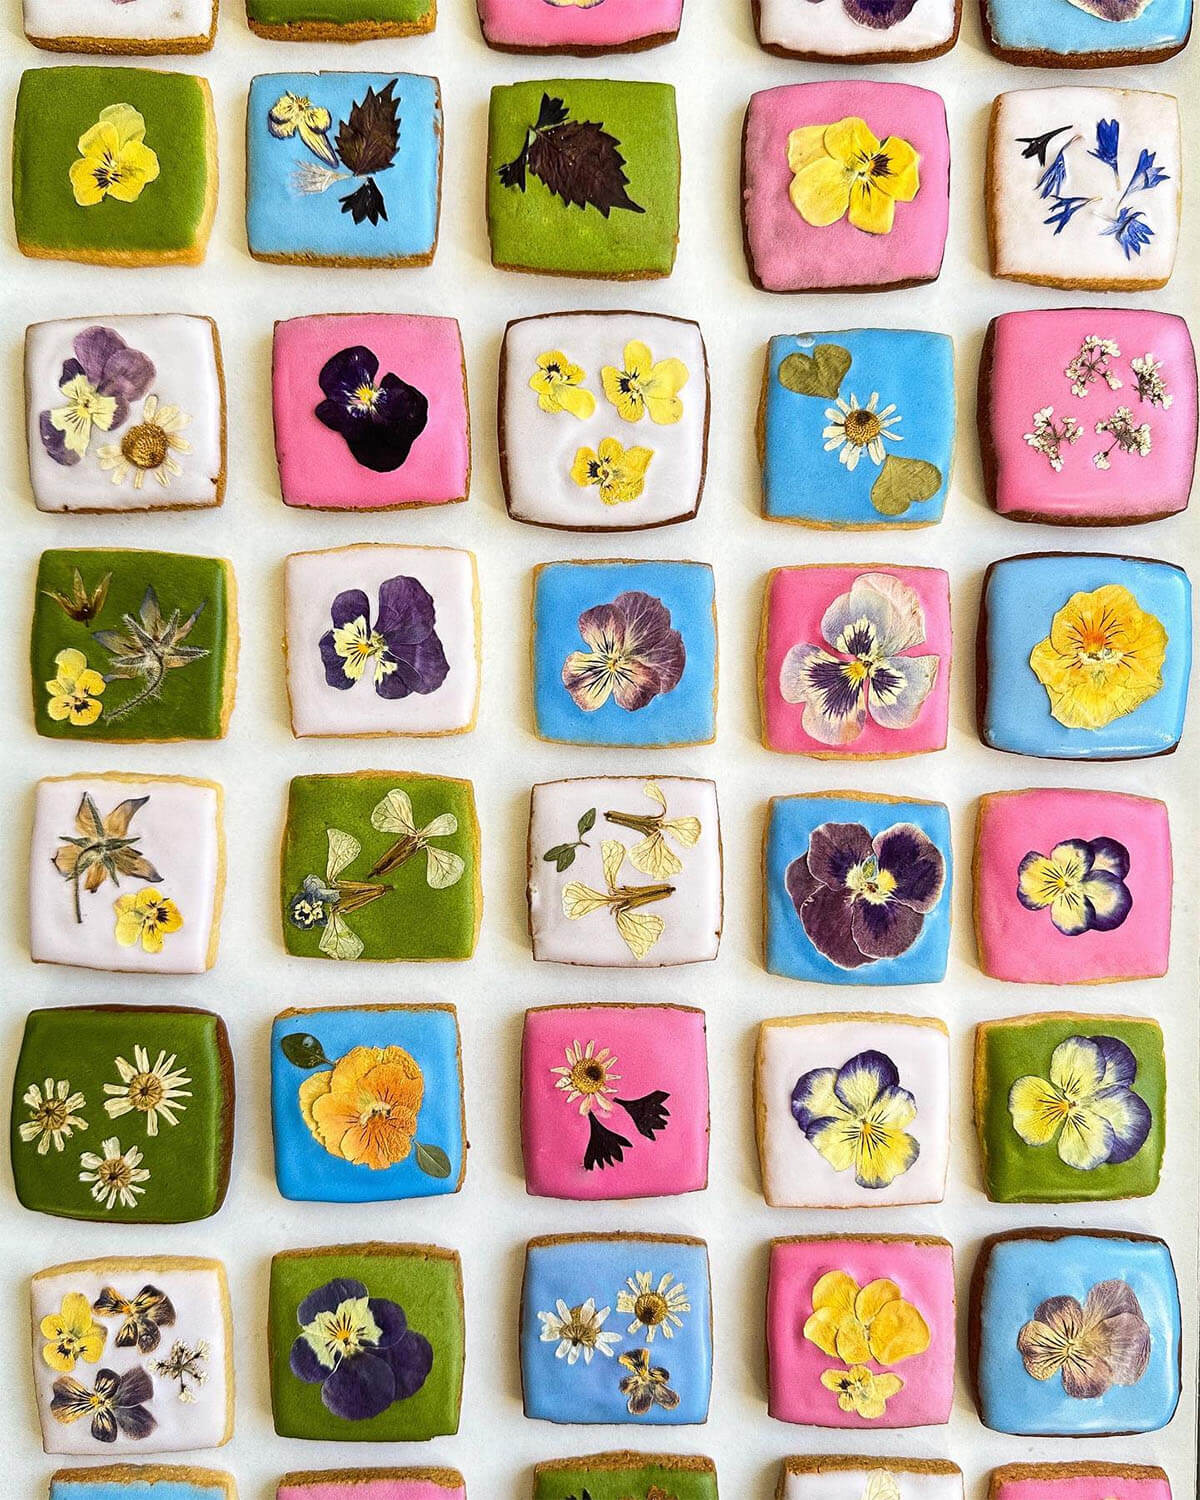 edible floral cookies with plant based dyes